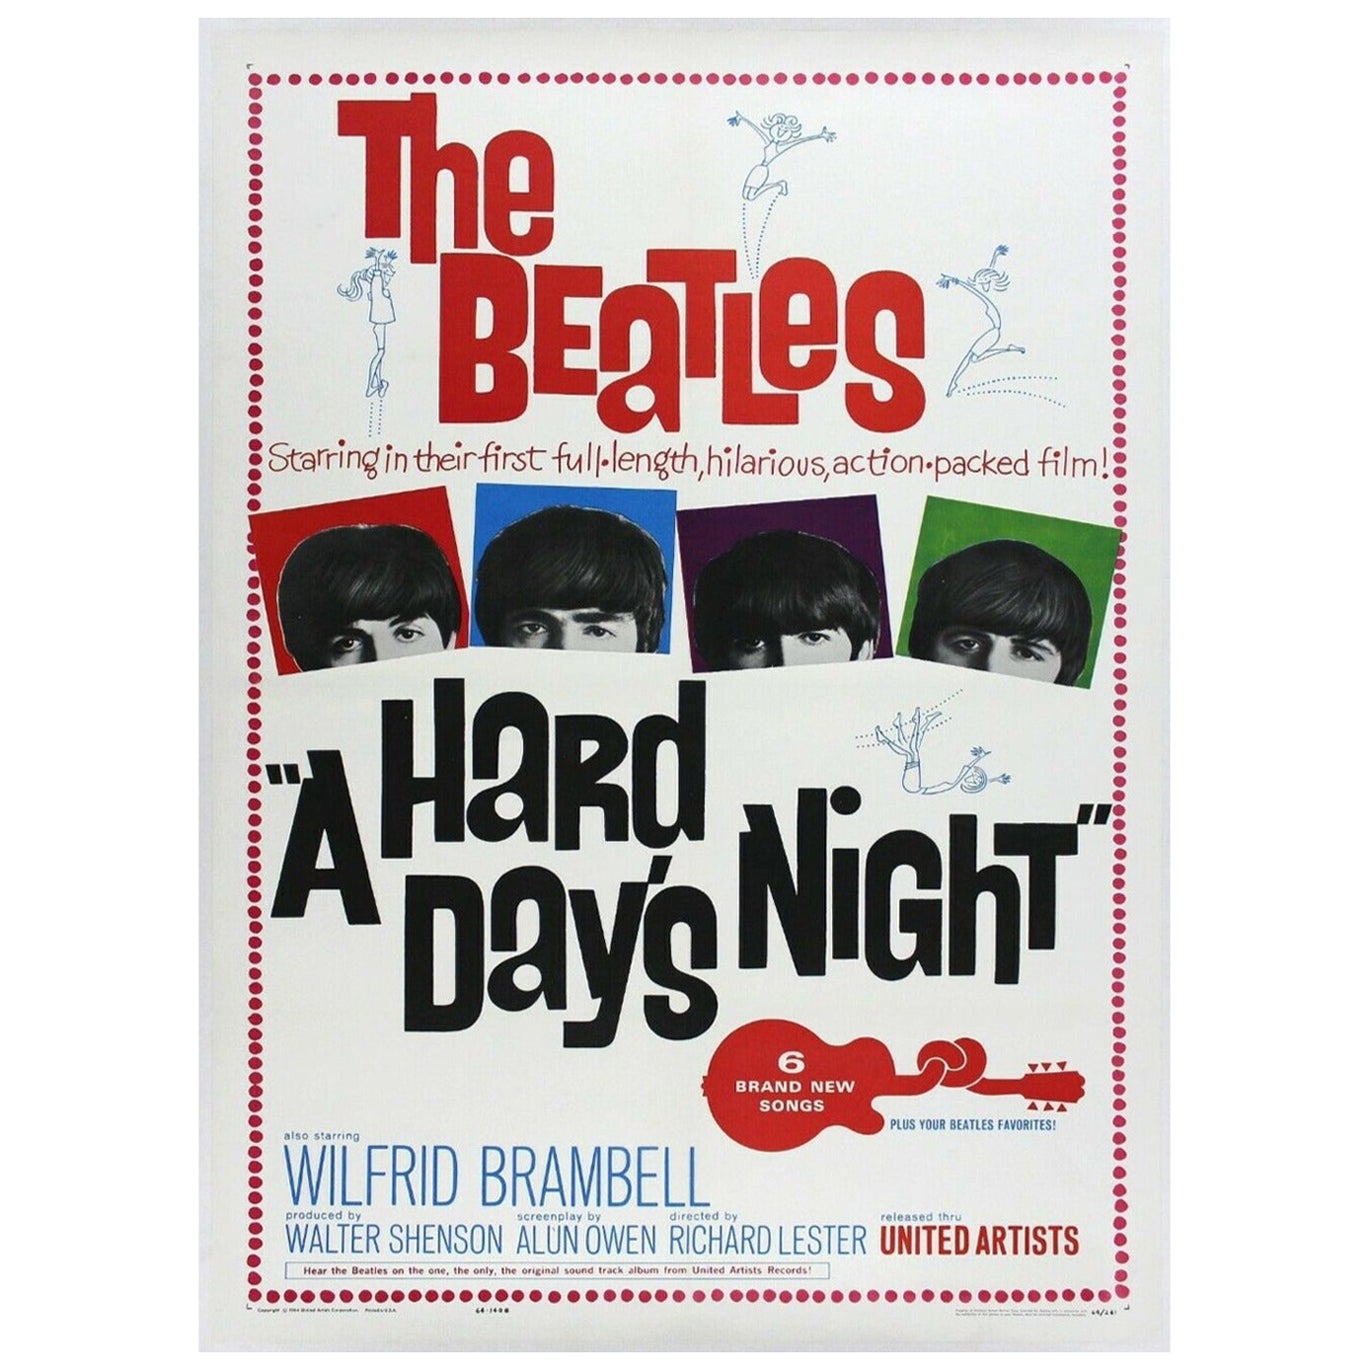 1965 The Beatles – A Hard Day's Night, Original-Vintage-Poster